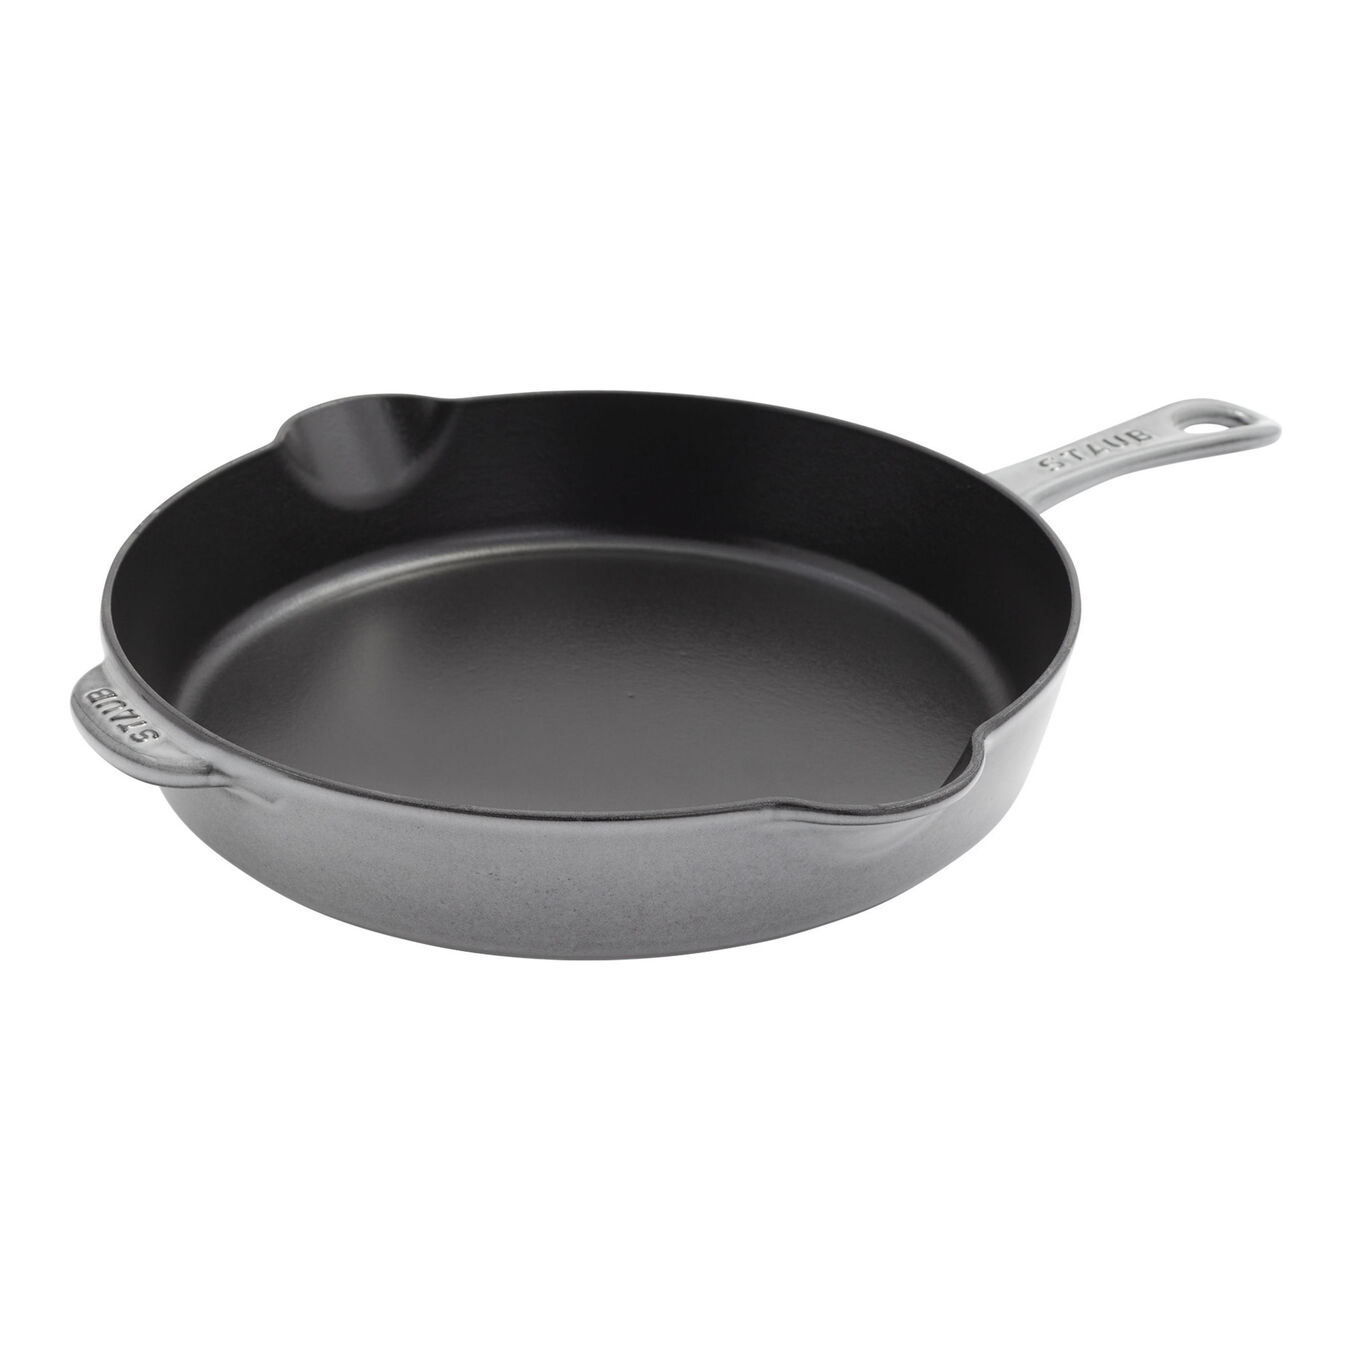 11-inch, Traditional Deep Skillet, graphite grey,,large 1